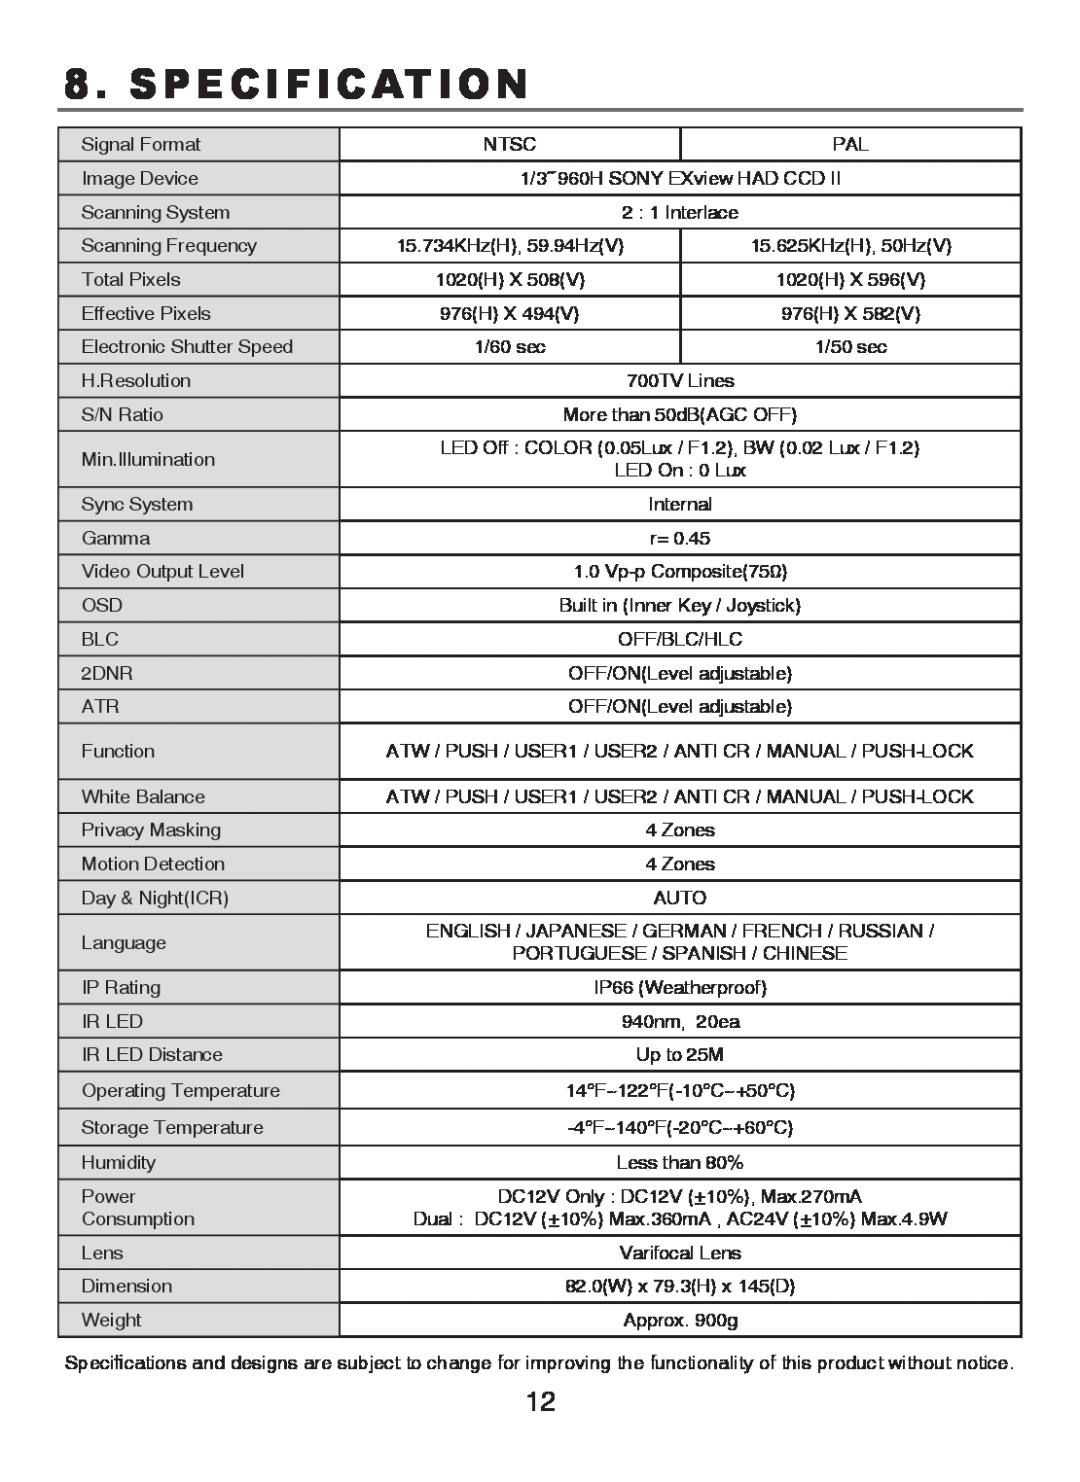 EverFocus M107-N501-001 operation manual Specification 